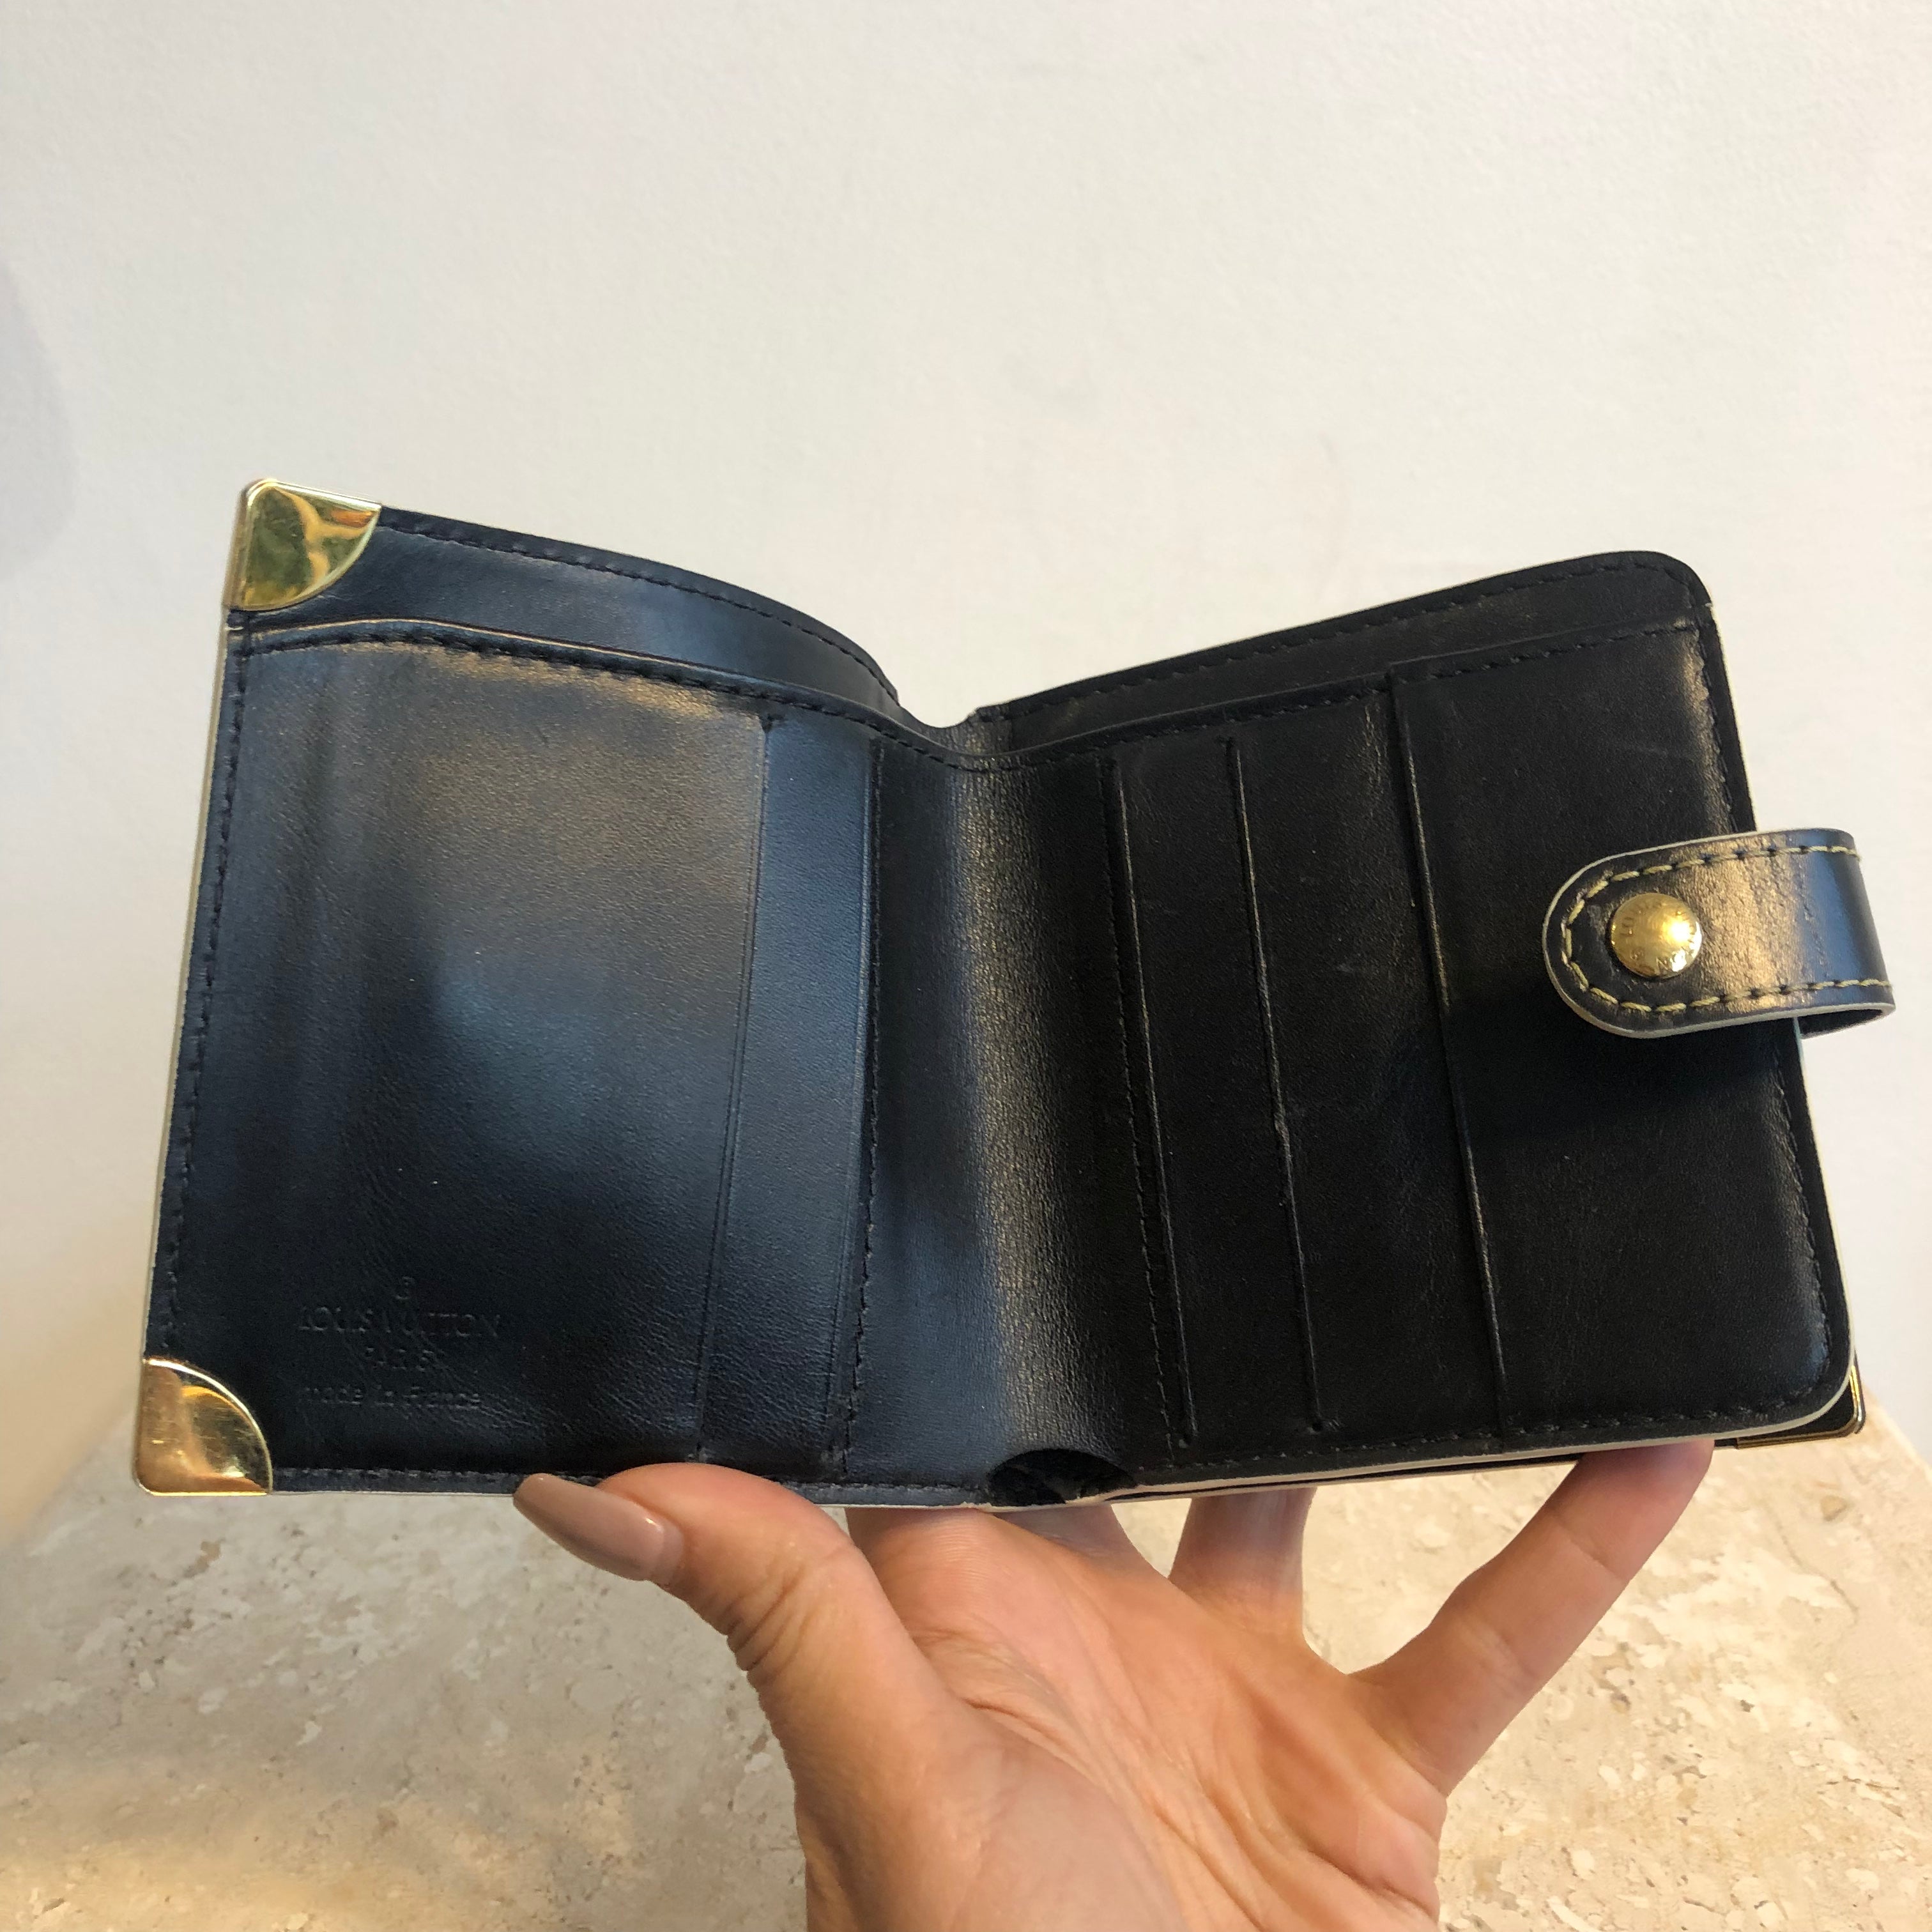 Louis Vuitton Taupe Suhali Leather Wallet